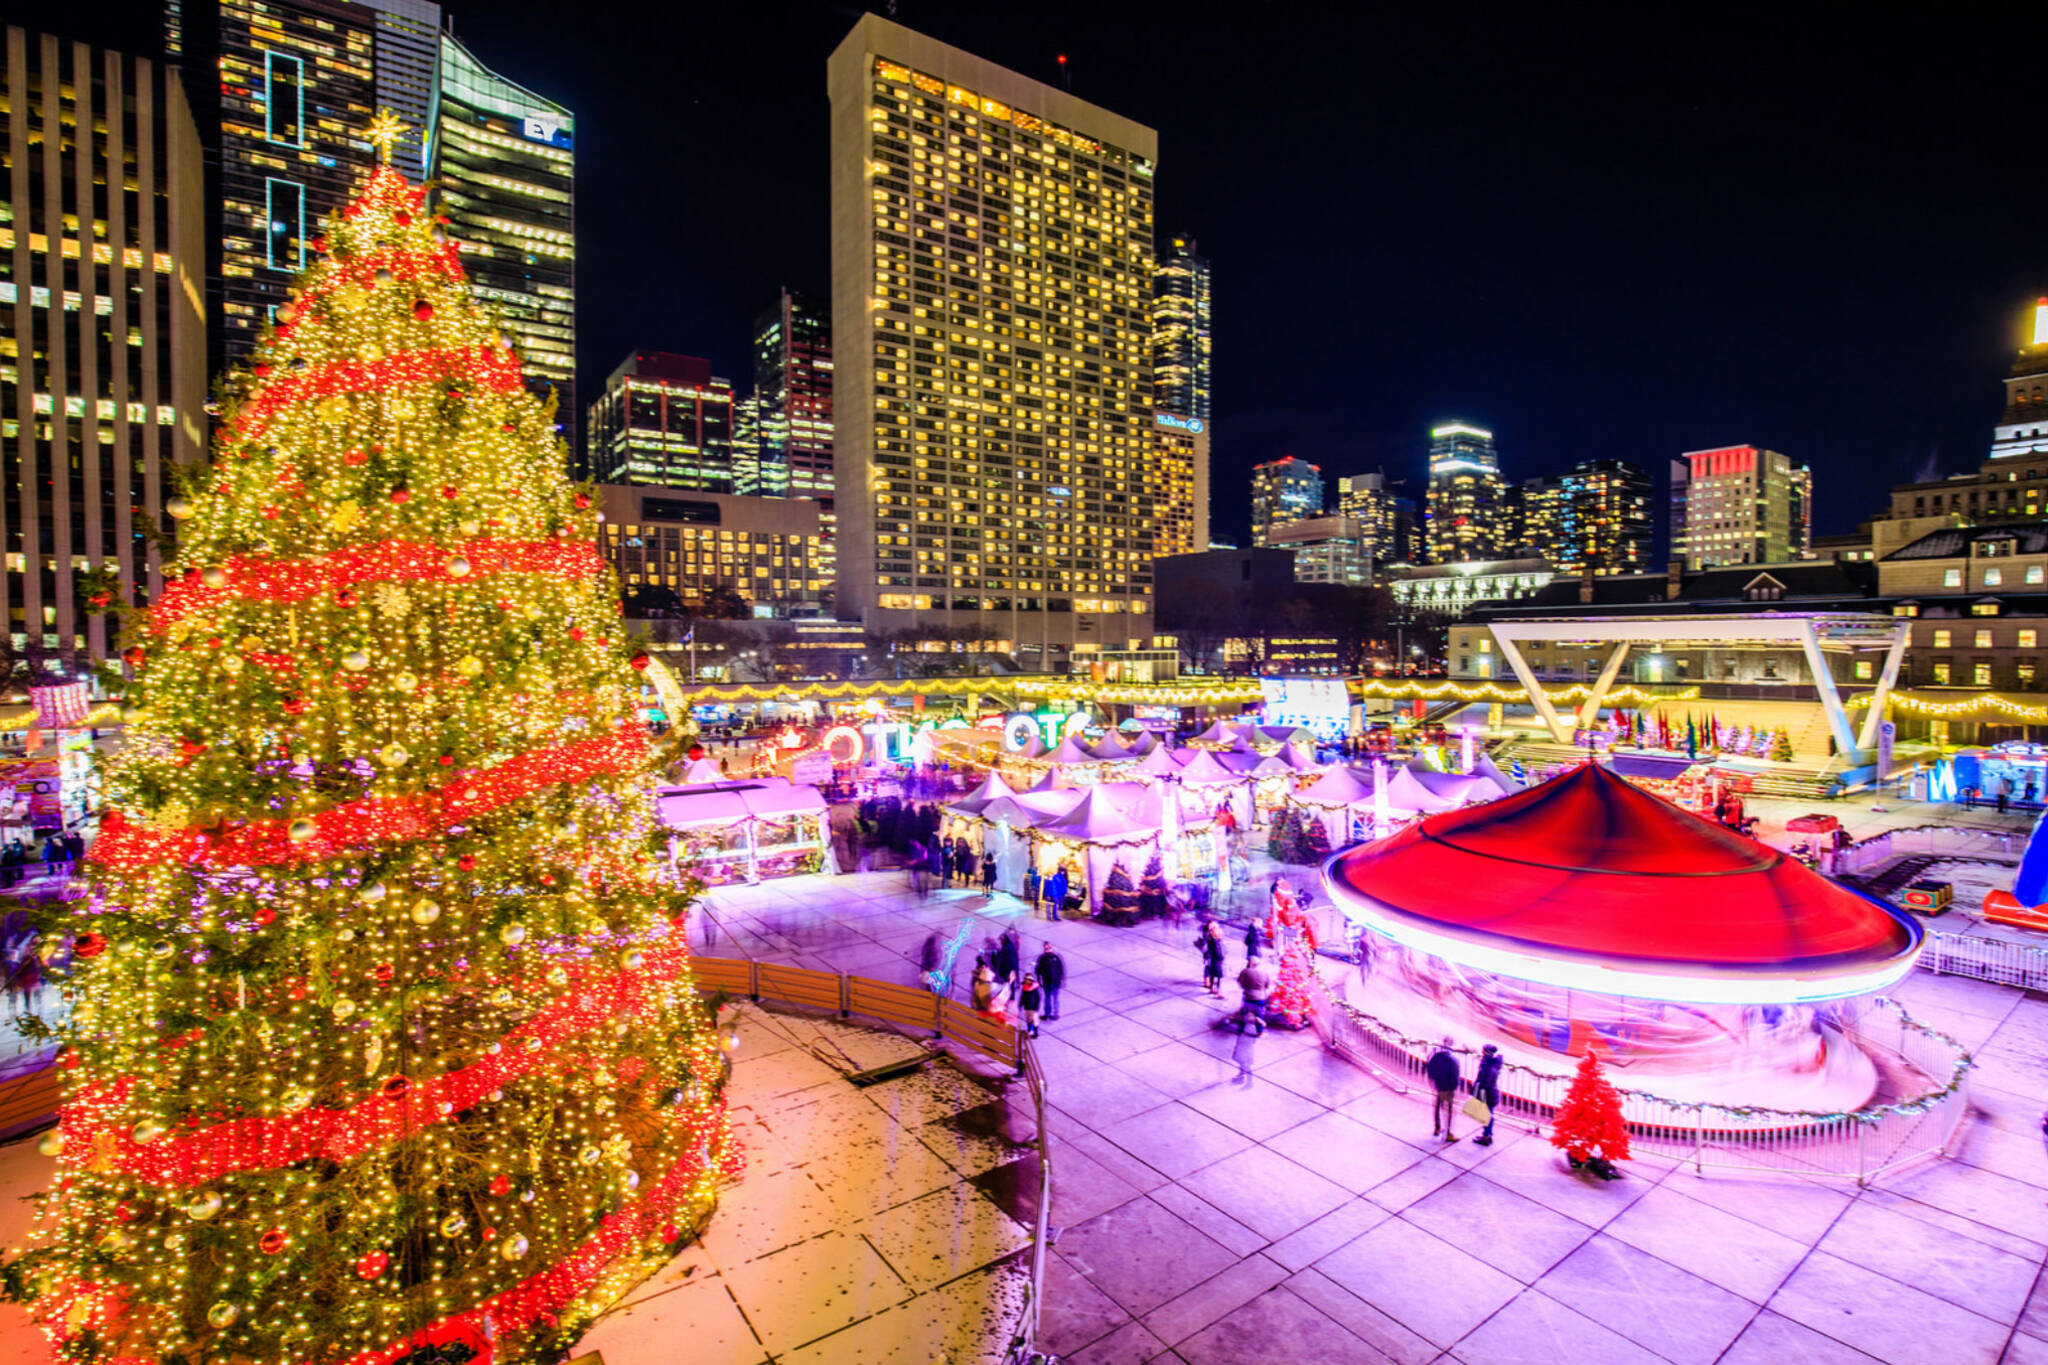 Here's a map of all the unreal holiday lights in Toronto